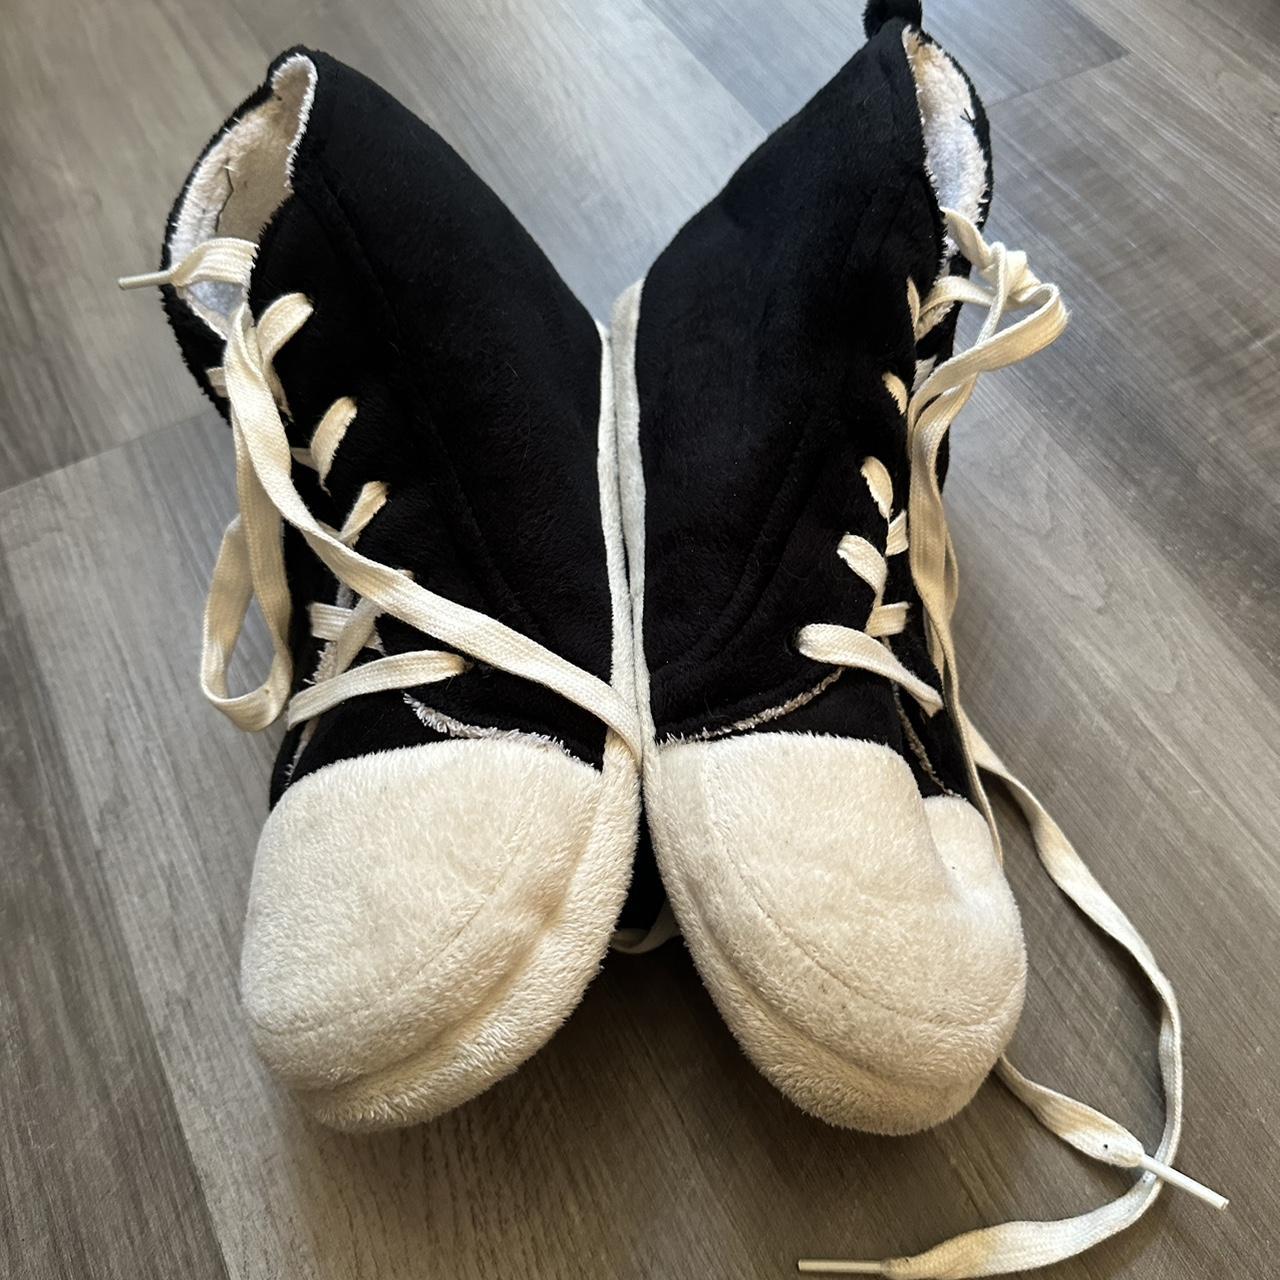 Goofy Rick Owen Slippers Size 9-10 THESE ARENT... - Depop